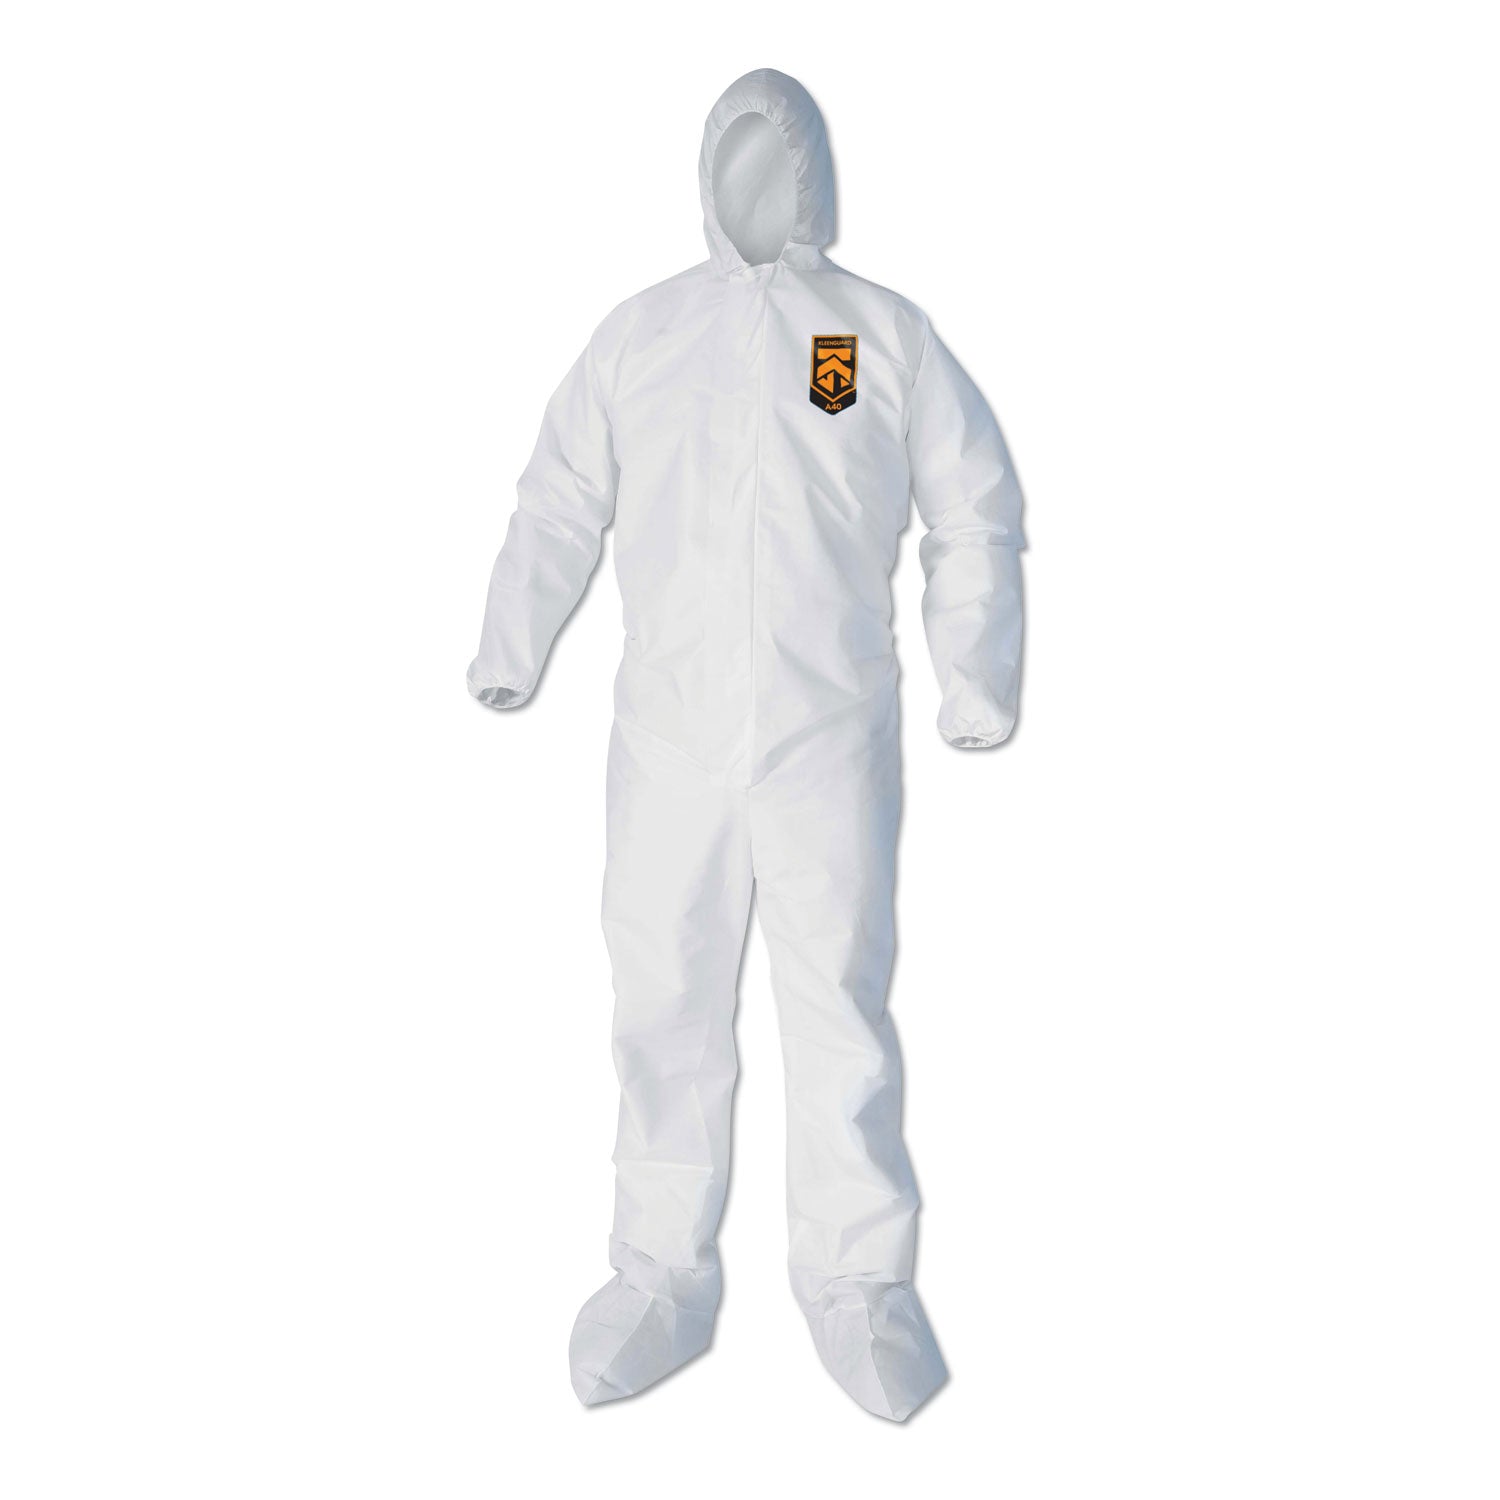 a40-elastic-cuff-ankle-hood-and-boot-coveralls-3x-large-white-25-carton_kcc44336 - 1